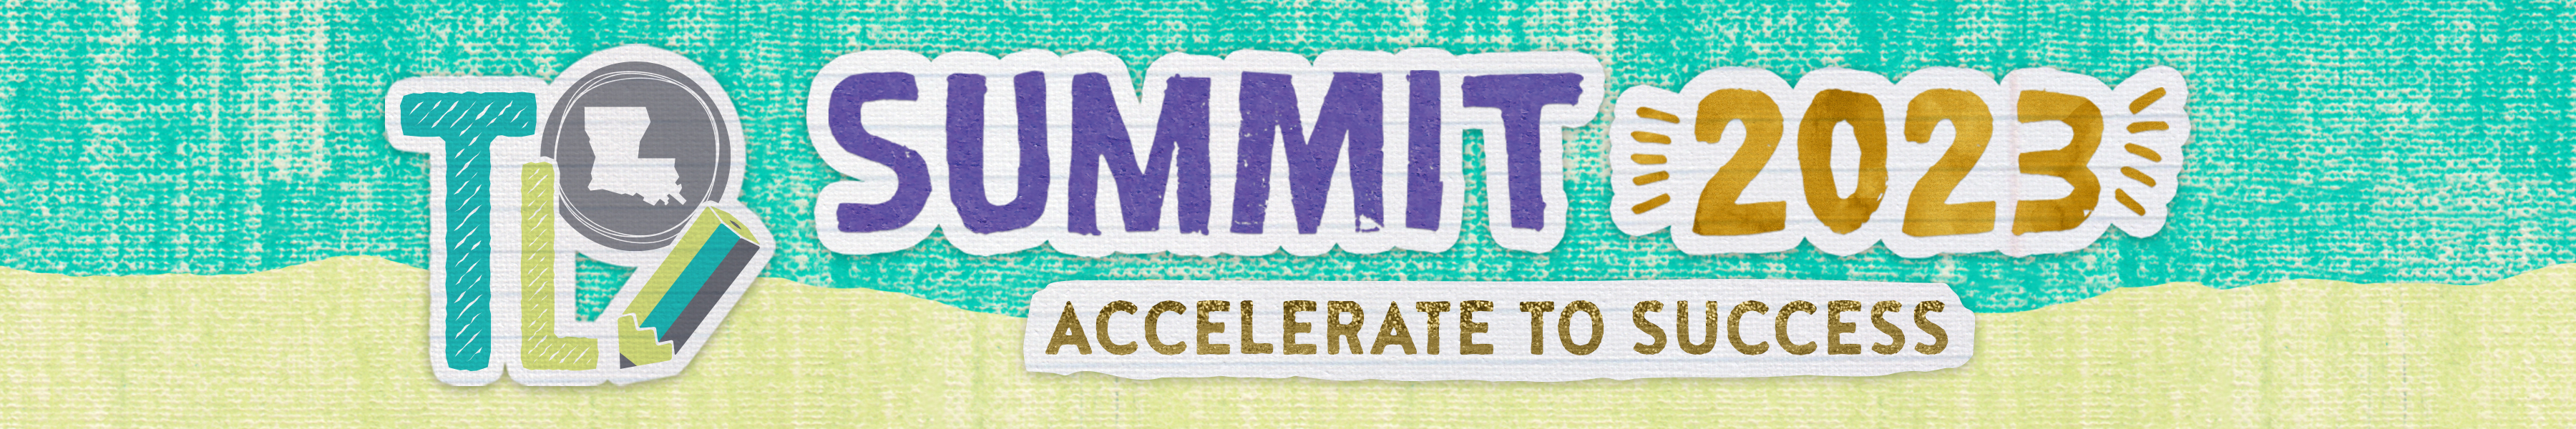 TL Summit 2023 - Accelerate to Success